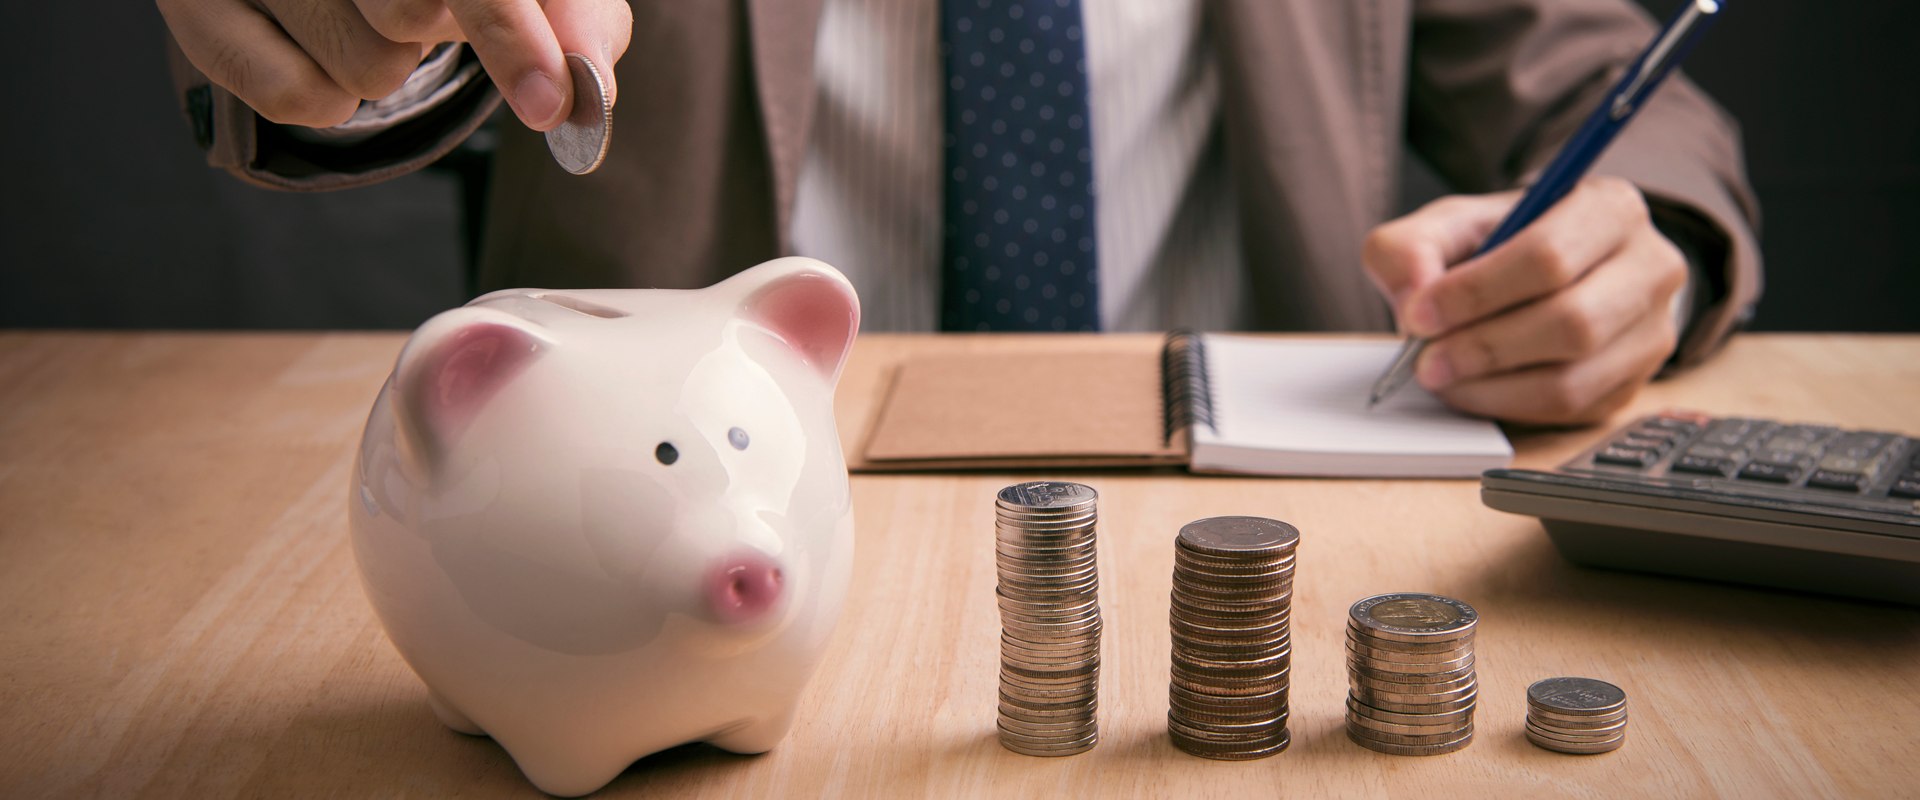 10 Cost-Saving Measures Every Business Should Implement